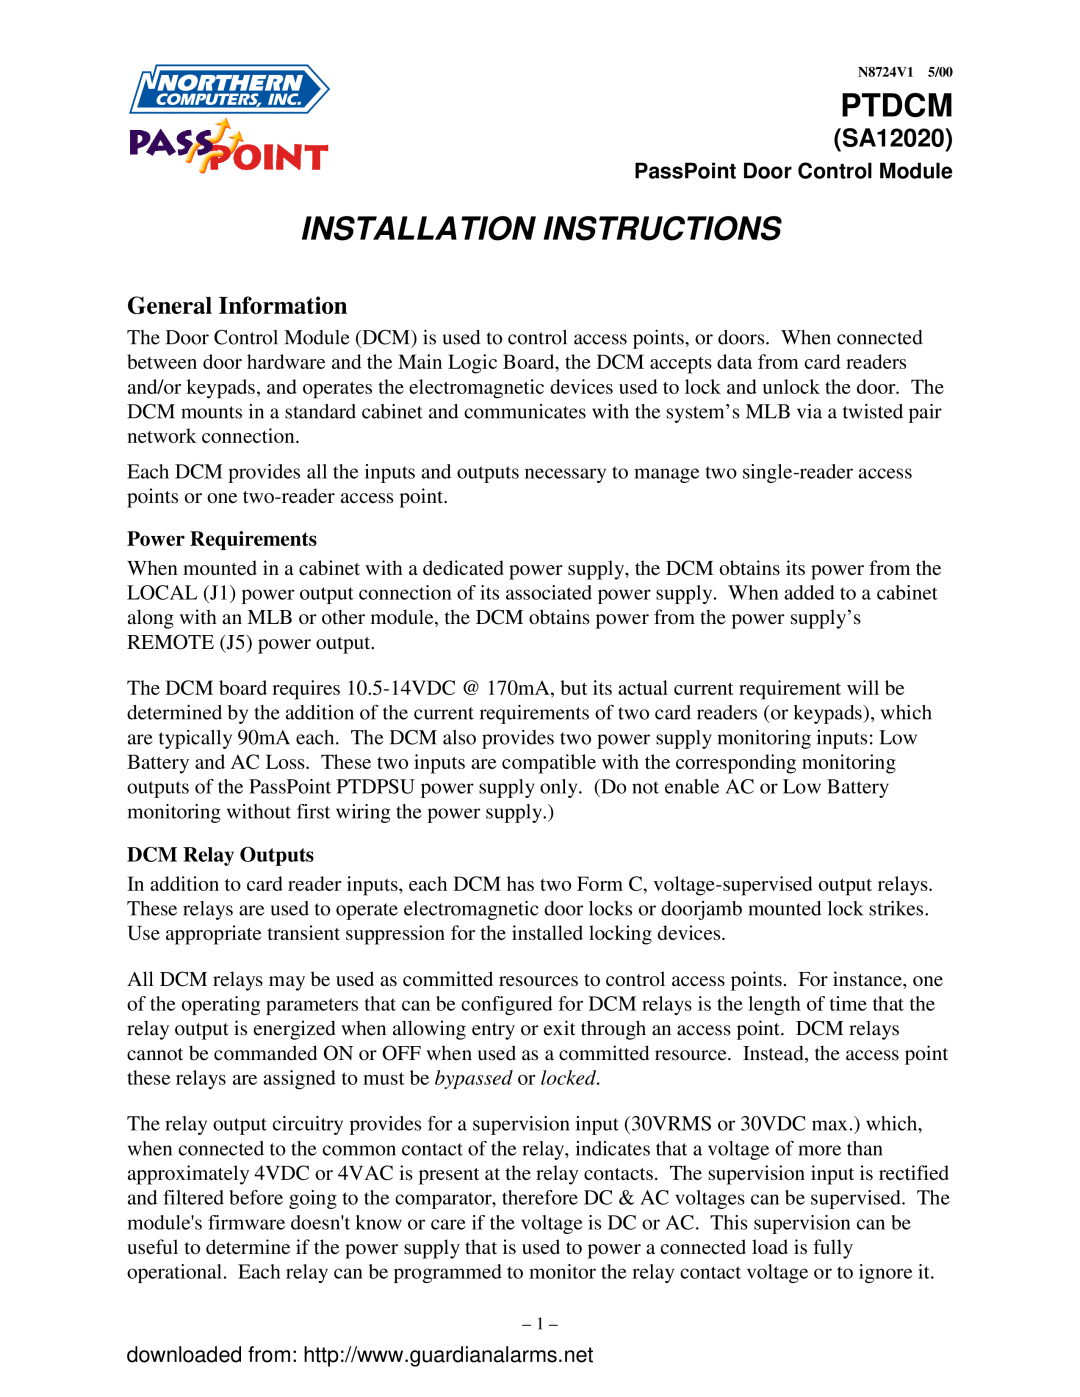 Guardian Technologies PTDCM (SA12020) installation instructions General Information, Power Requirements, DCM Relay Outputs 